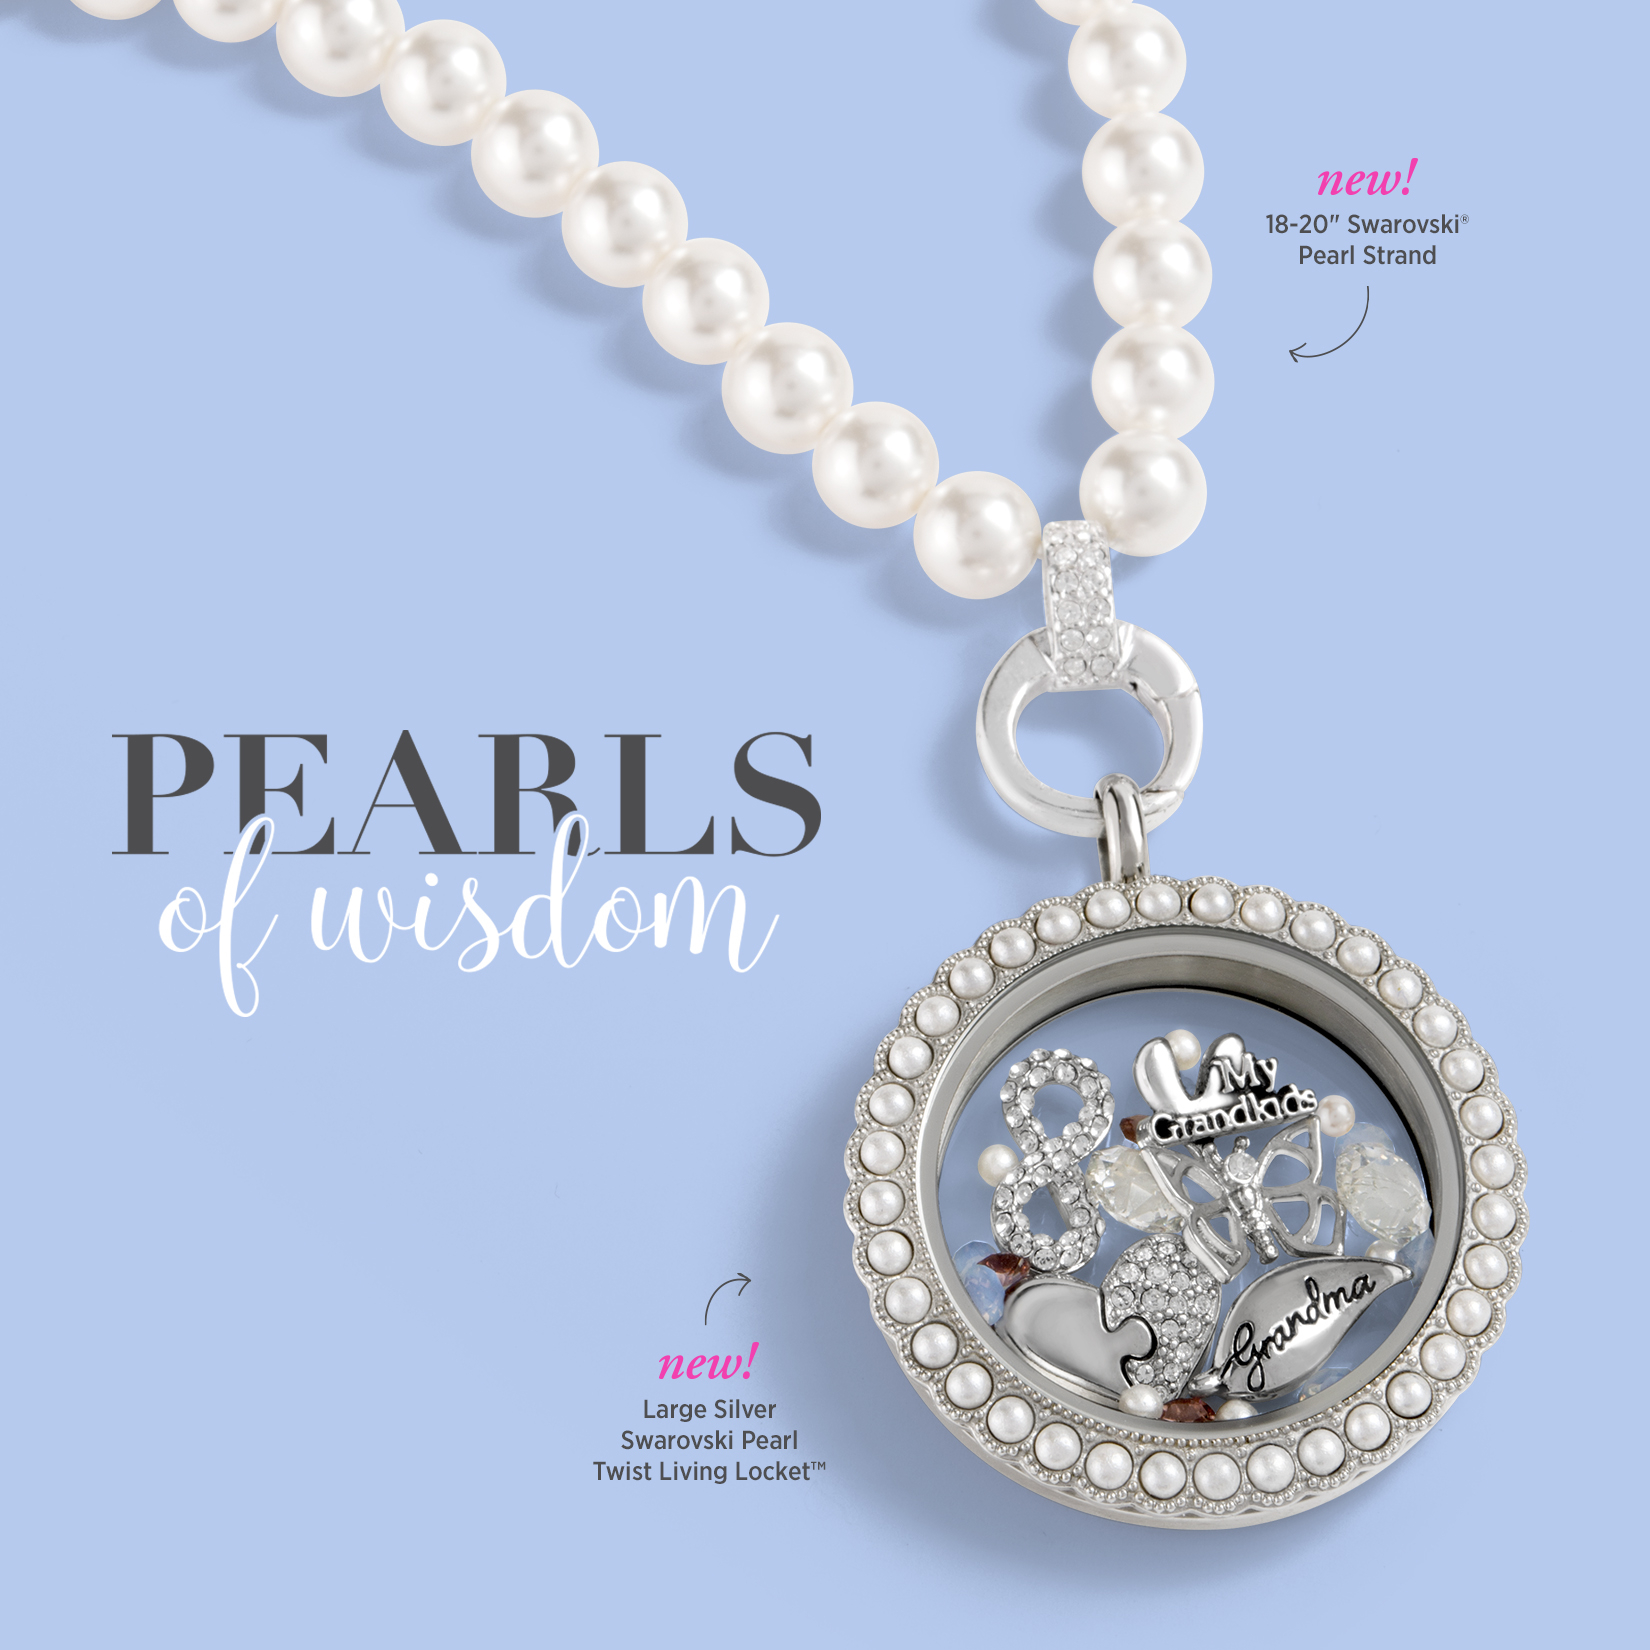 Origami Owl Prices Origami Owl Necklace About Jewelery